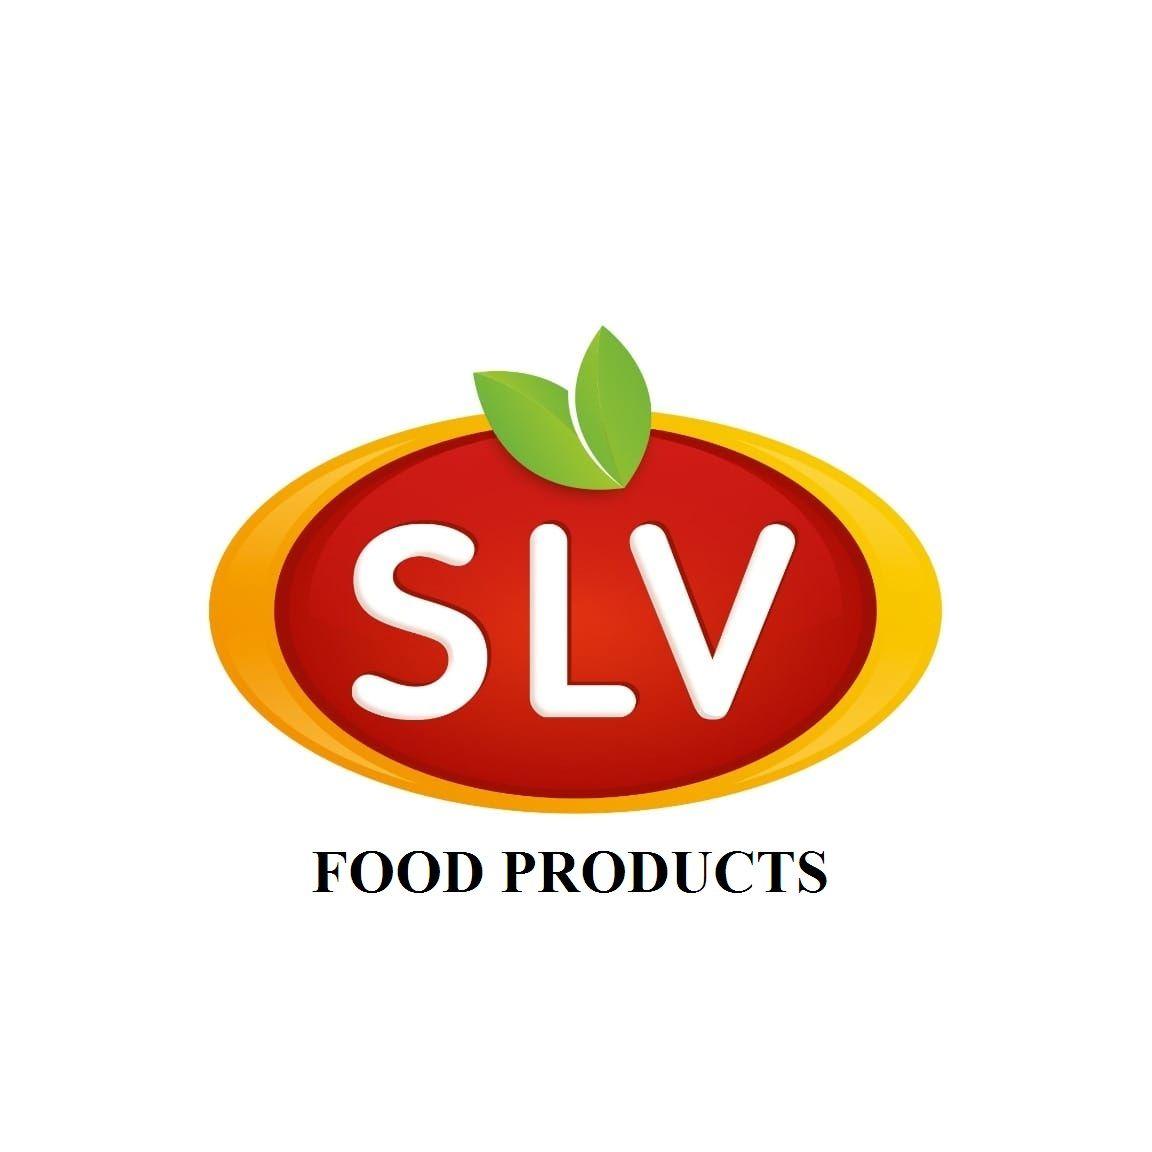 SLV FOOD PRODUCTS